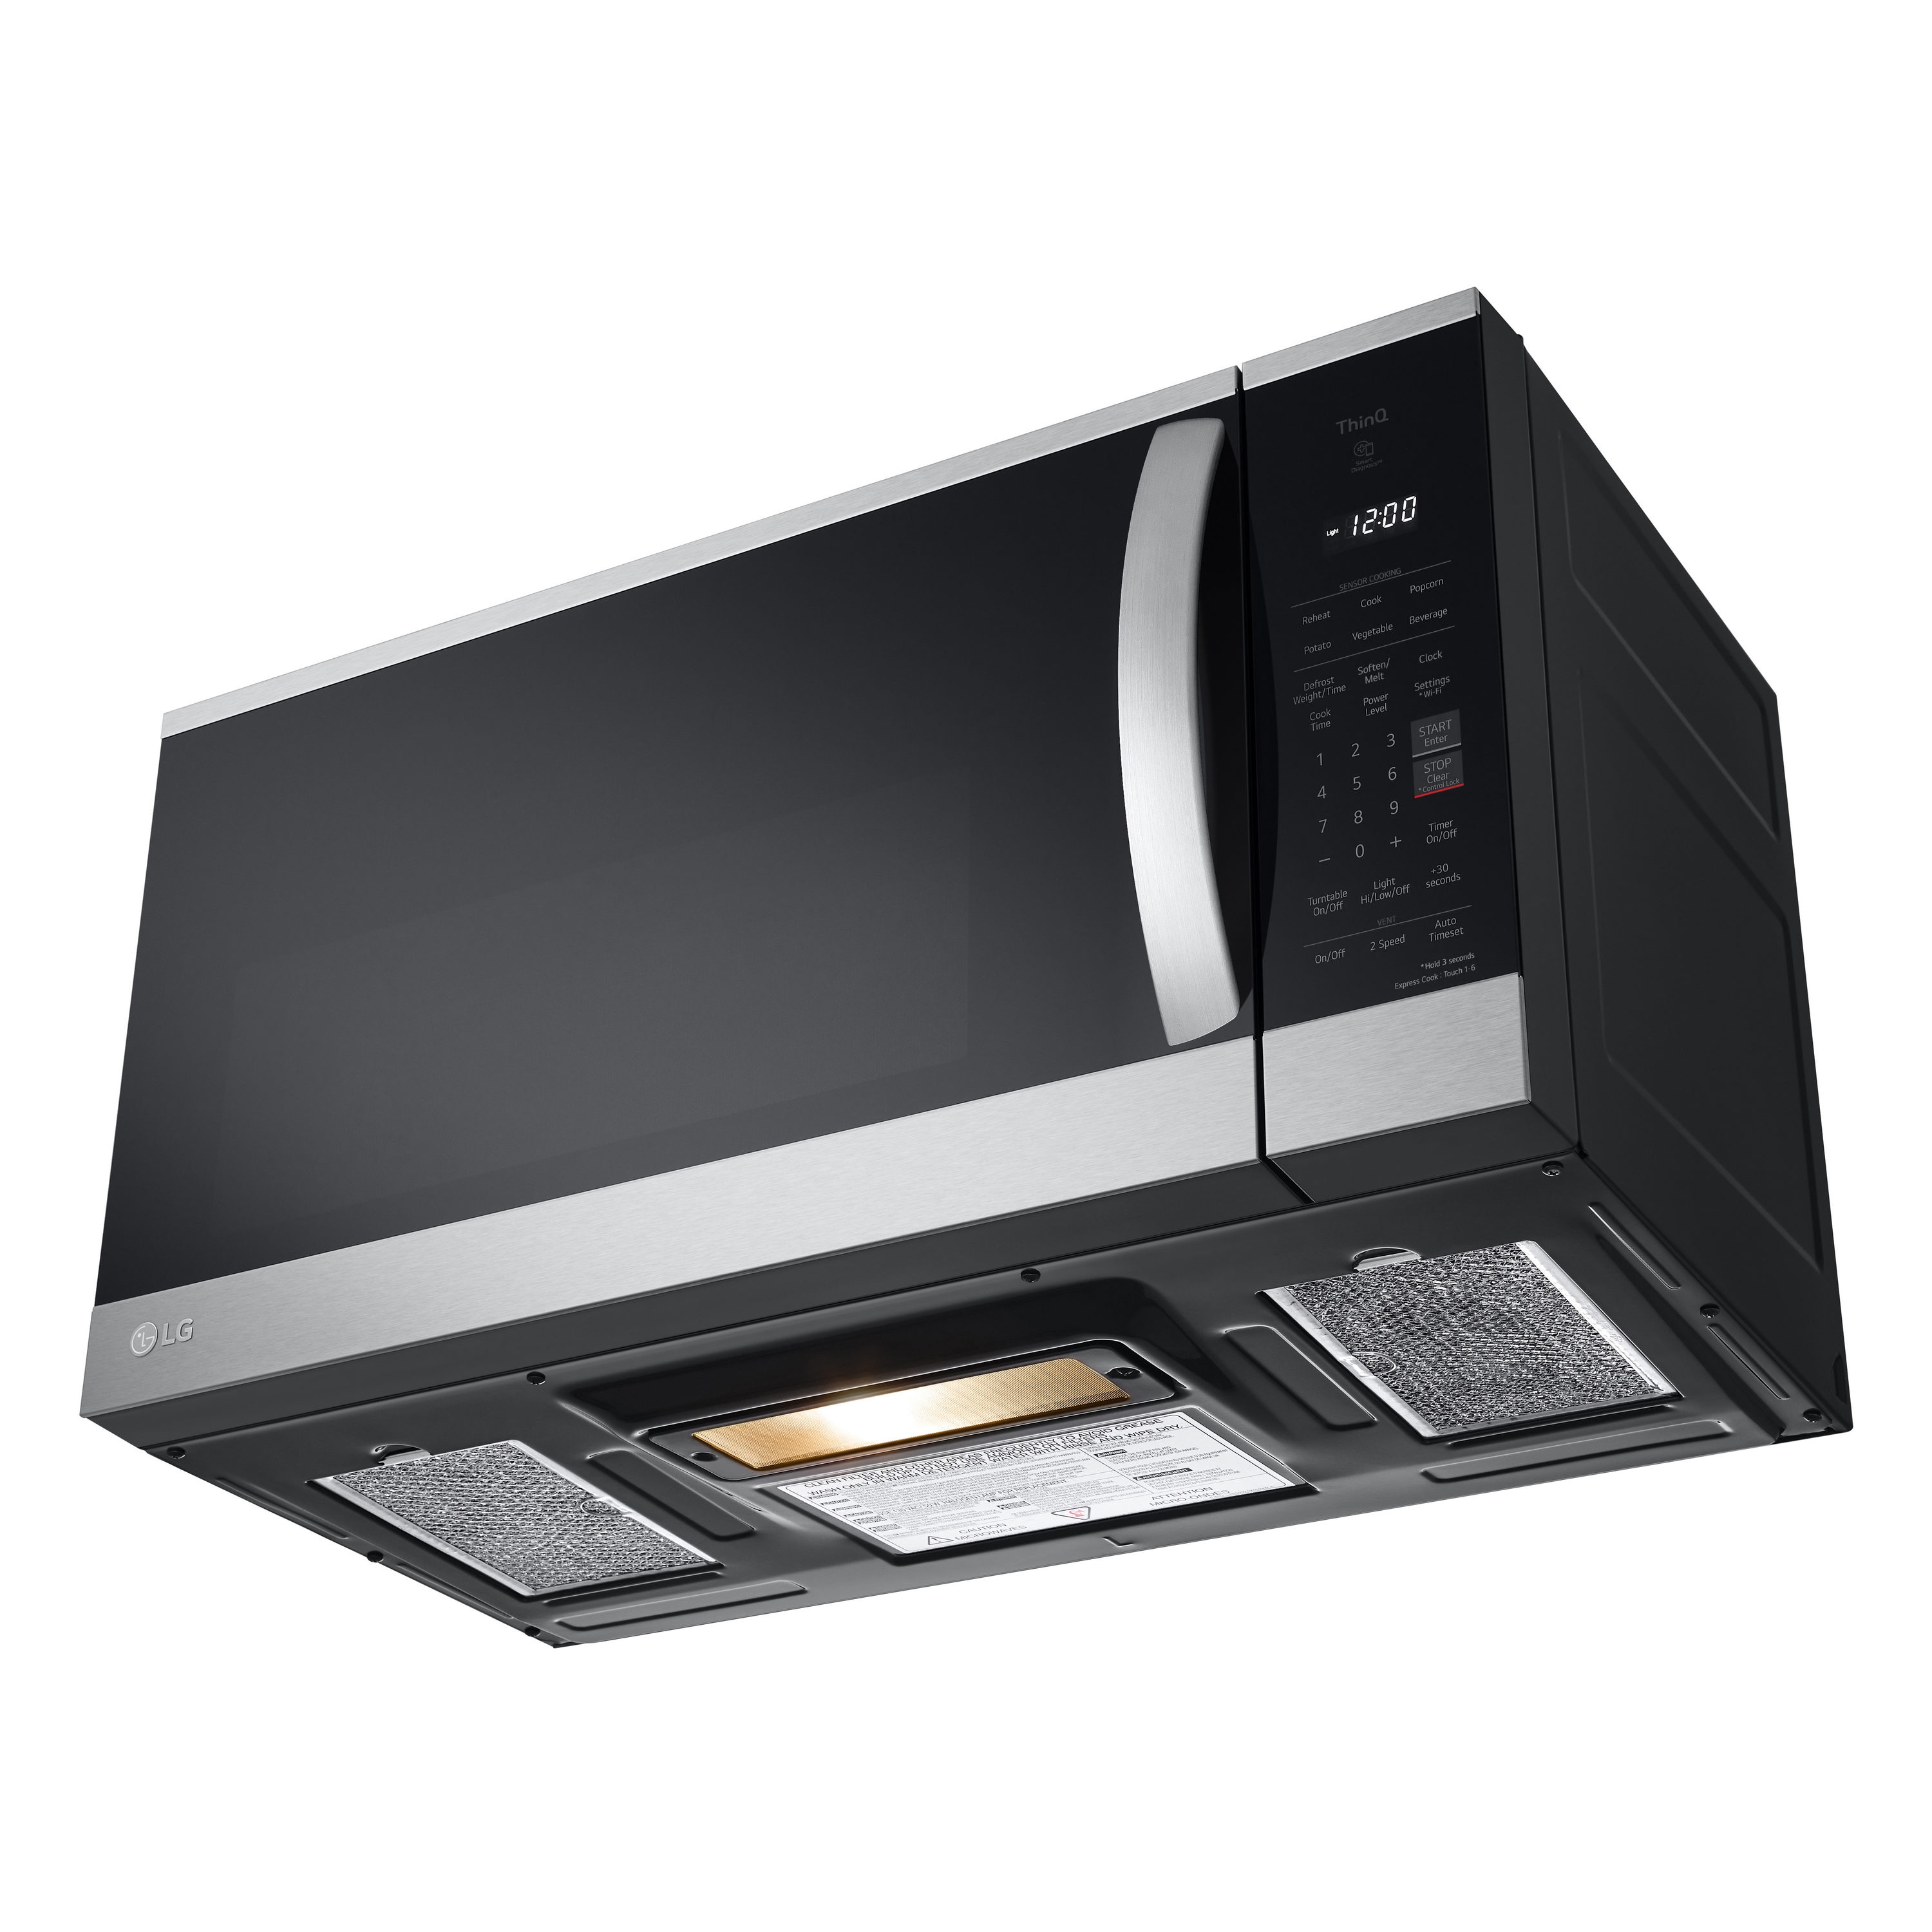 LG (Printproof Sensor Over-the-Range the Stainless ft Over-the-Range Steel) 1000-Watt Cooking at 1.8-cu Smart Microwaves department with in Microwave